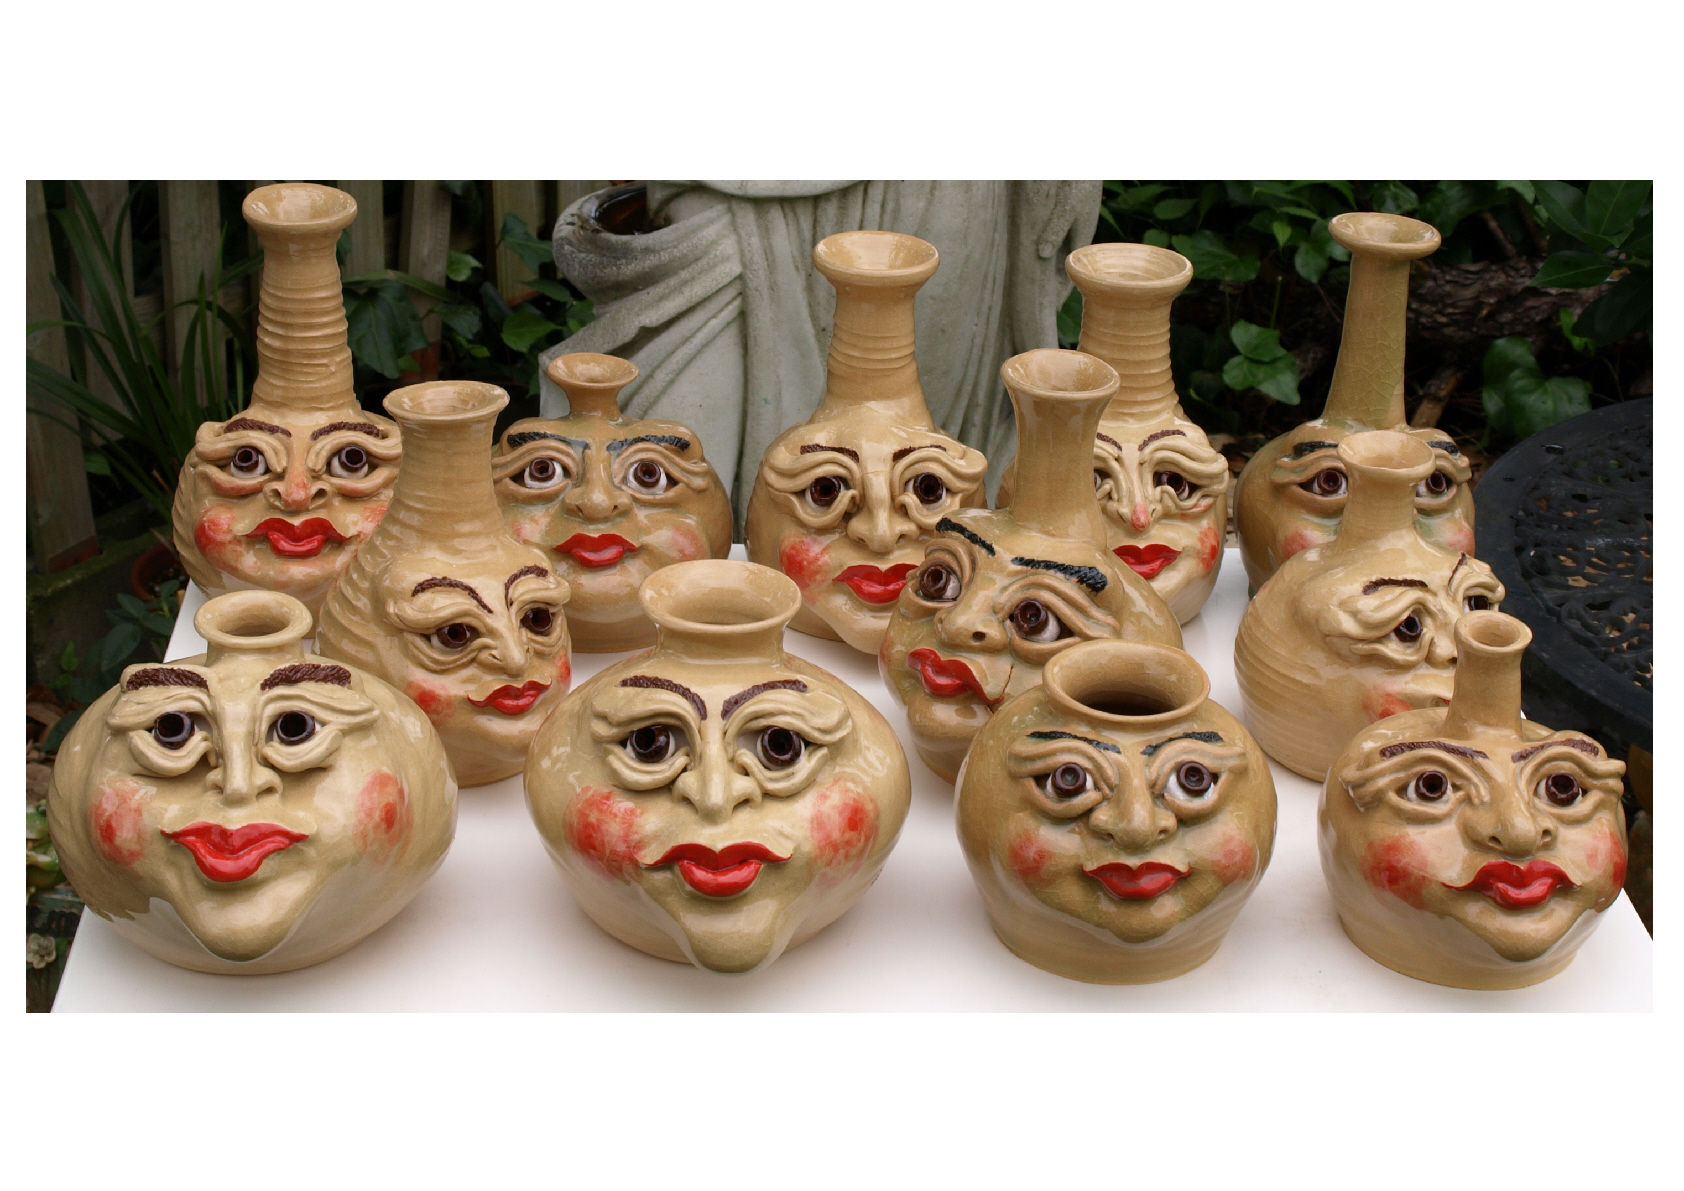 gazed human face pots series, works of pottery